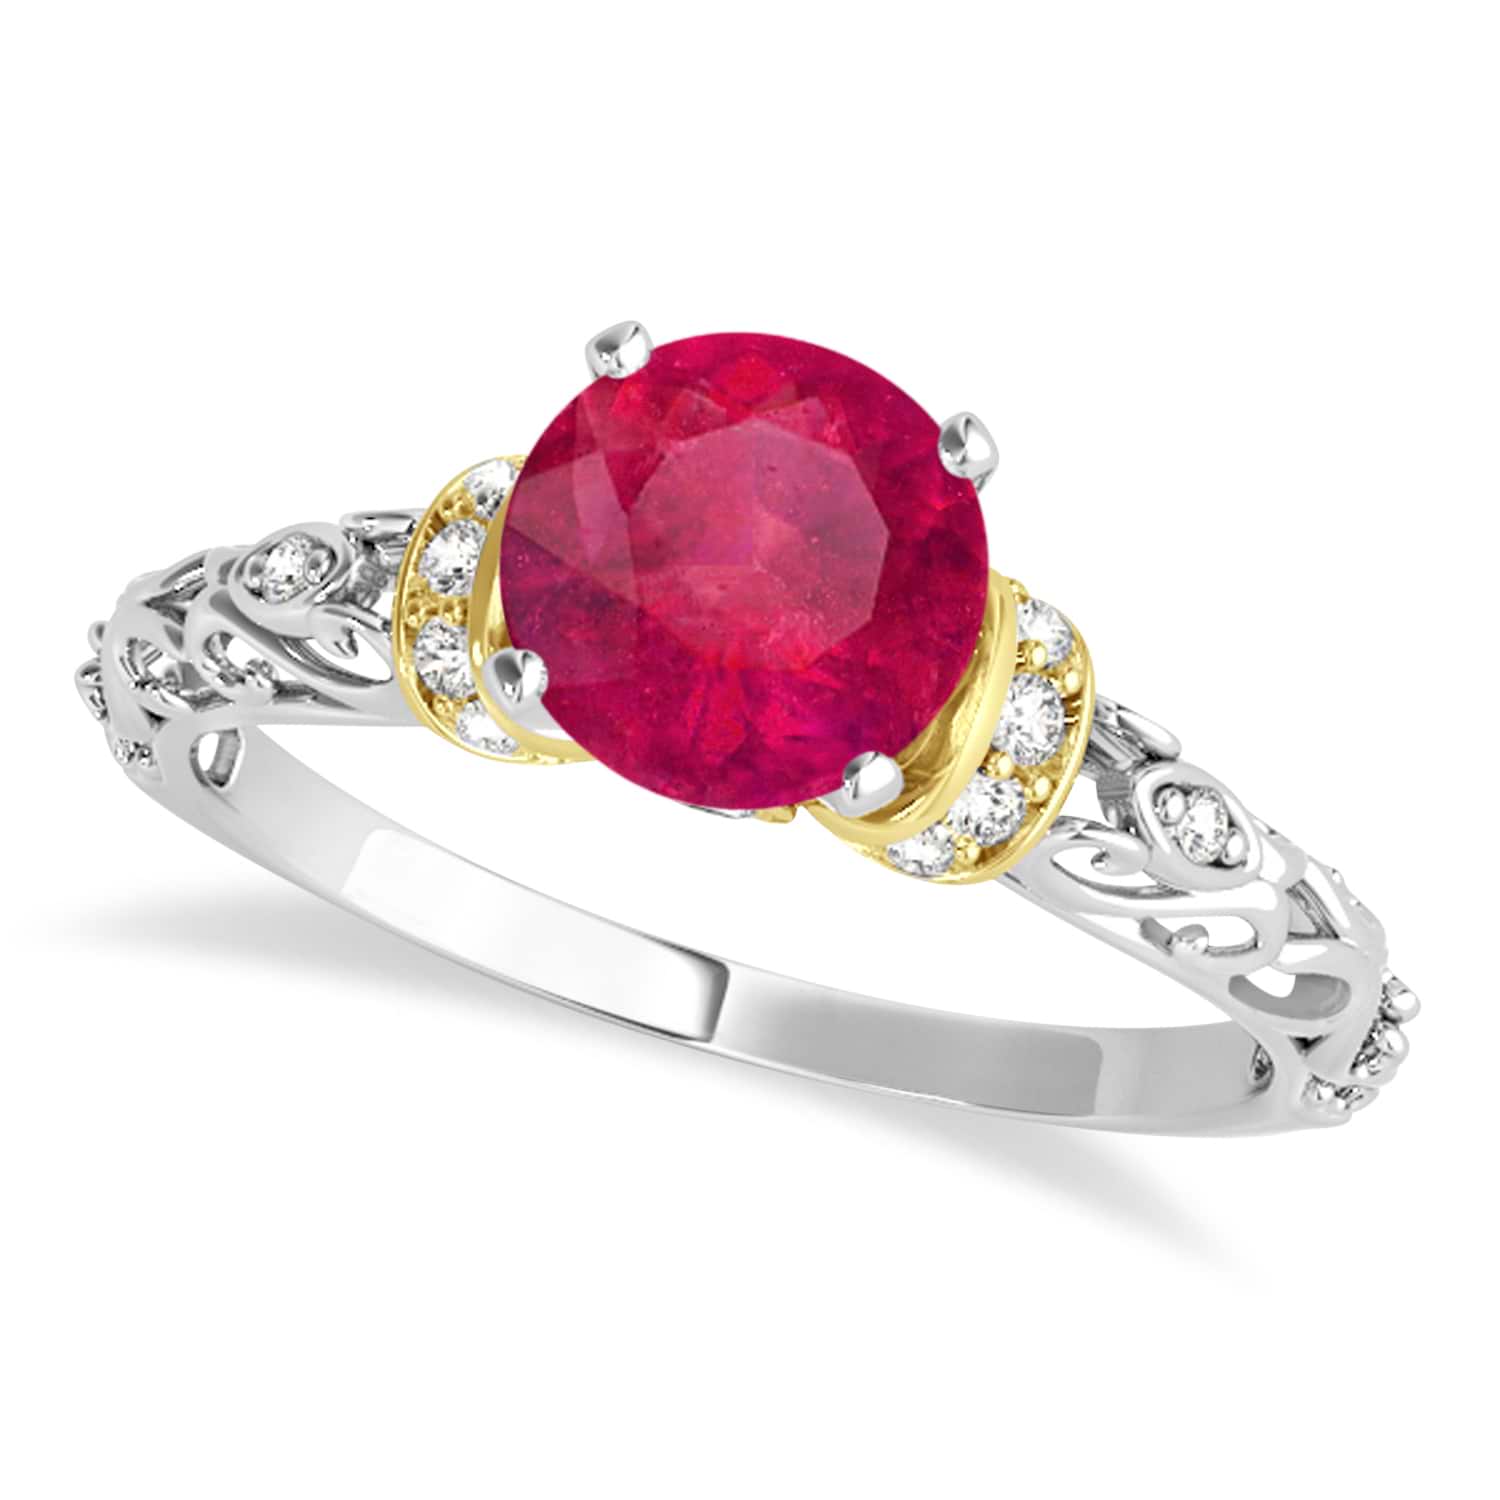 Ruby & Diamond Antique Style Engagement Ring 14k Two-Tone Gold (1.62ct)